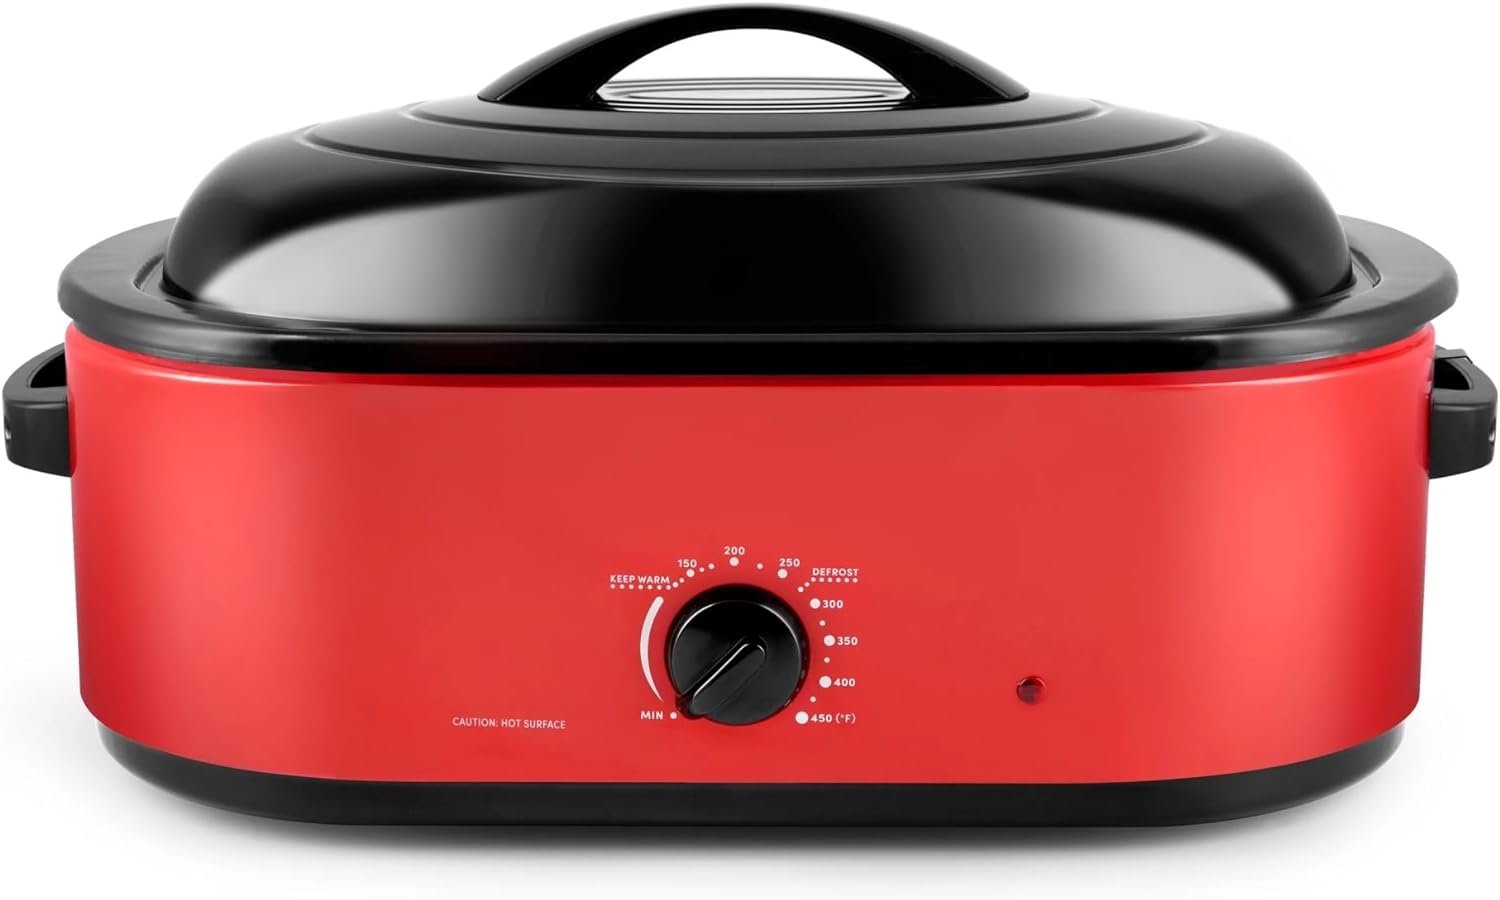 18Qt. Electric Roaster Oven with Metal Inner Rack - Red